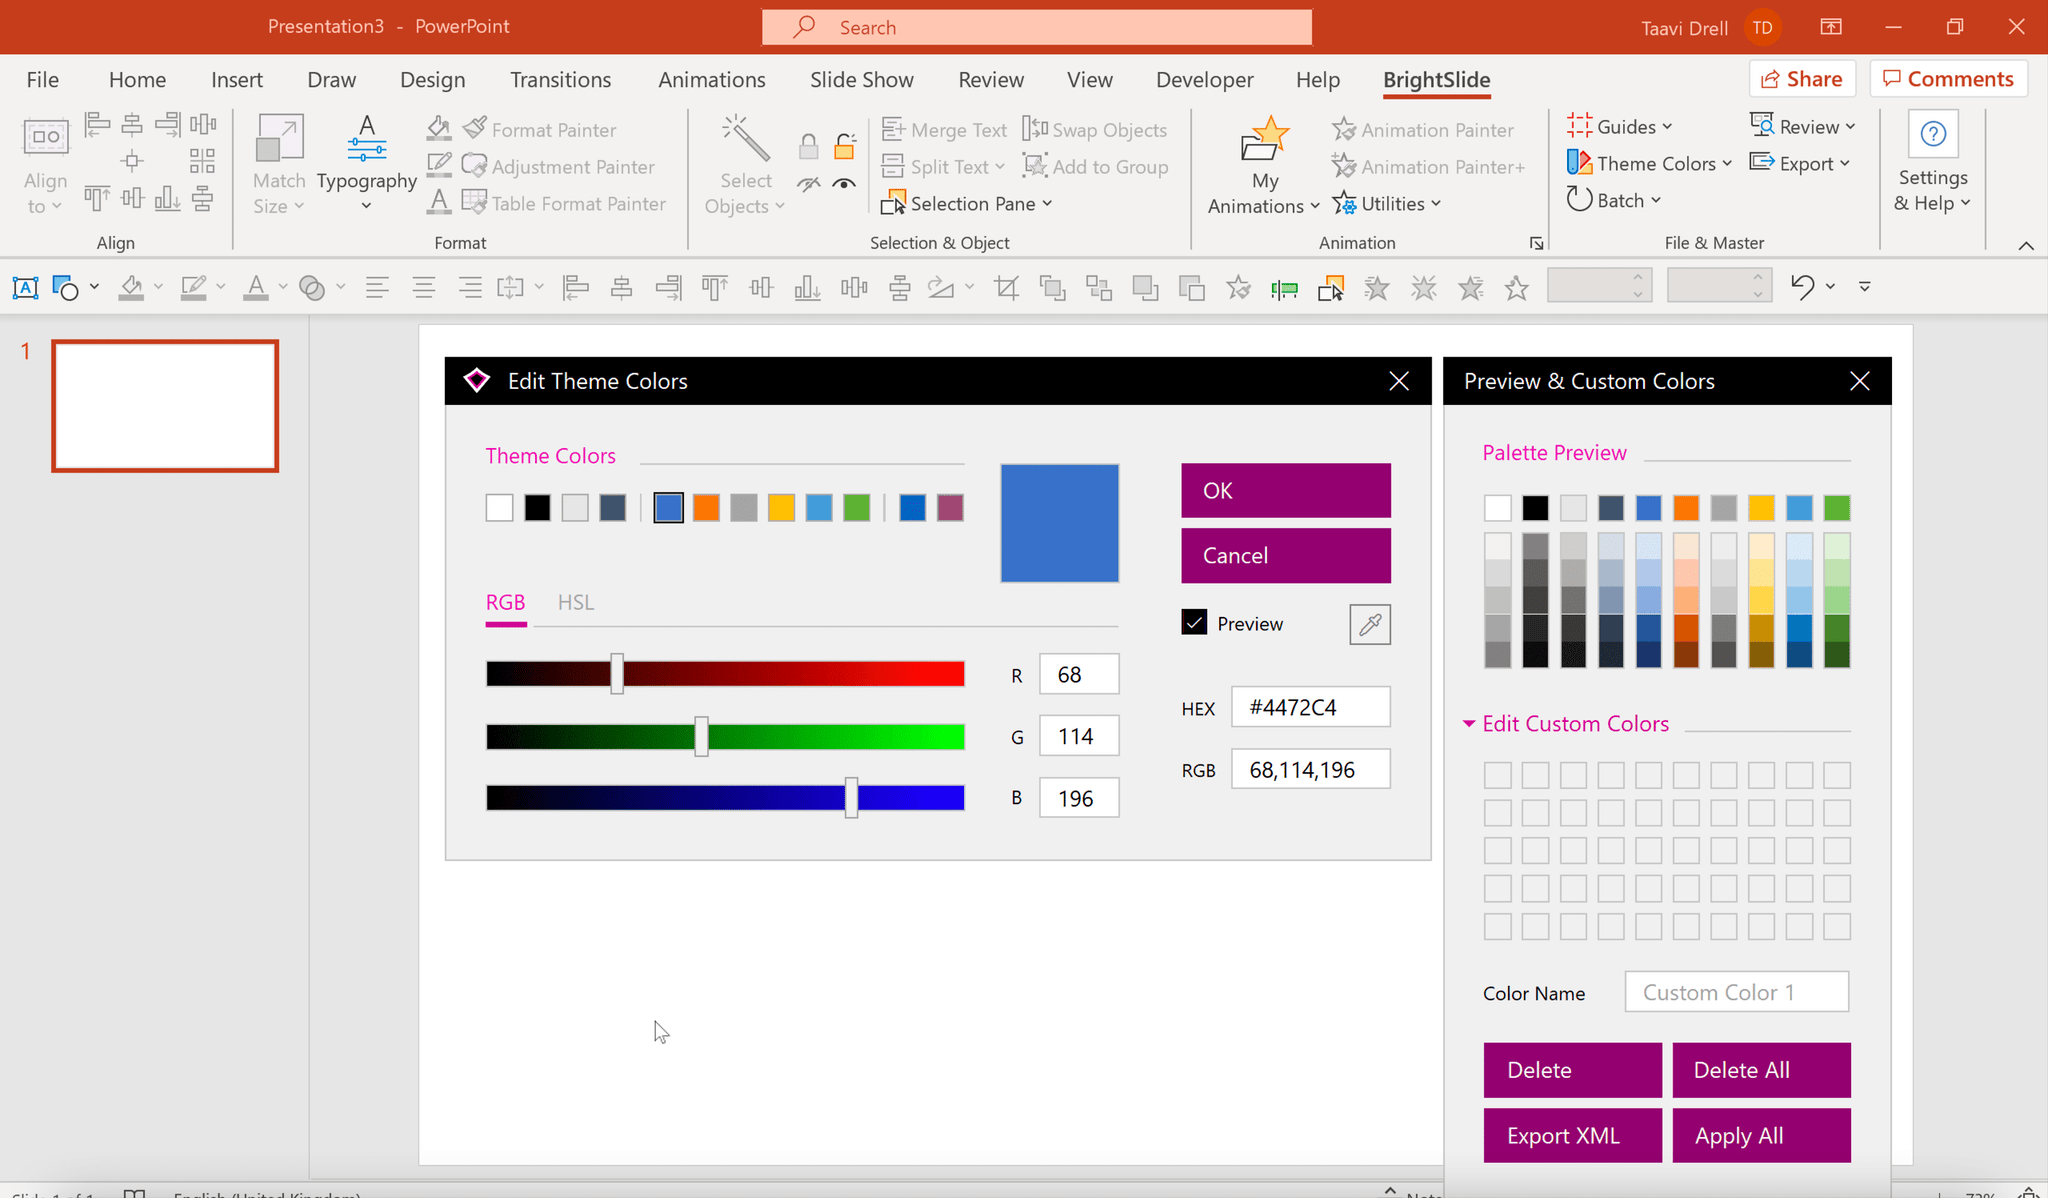 How To Change Color In Powerpoint?